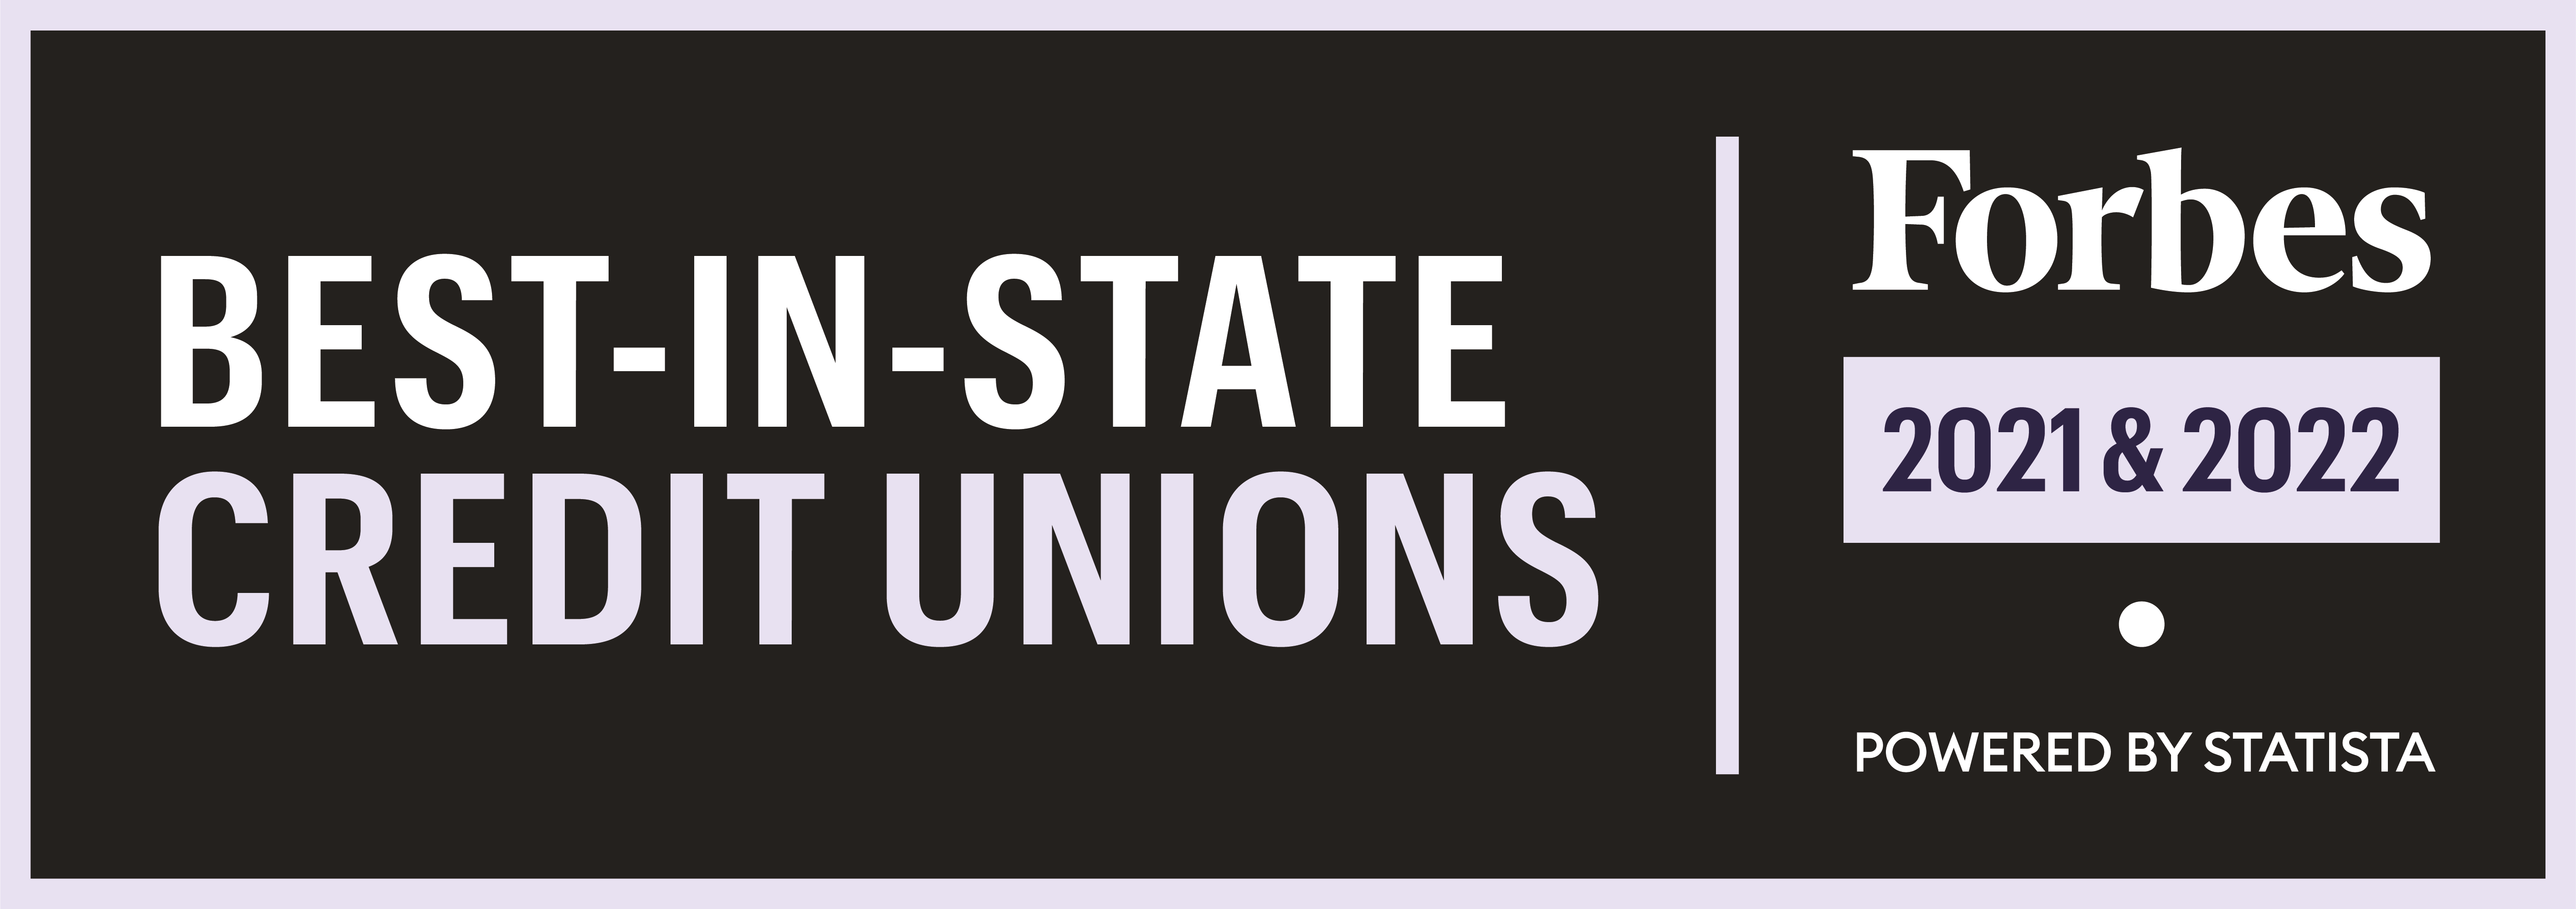 best-in-state-credit-unions forbes 2021 & 2022